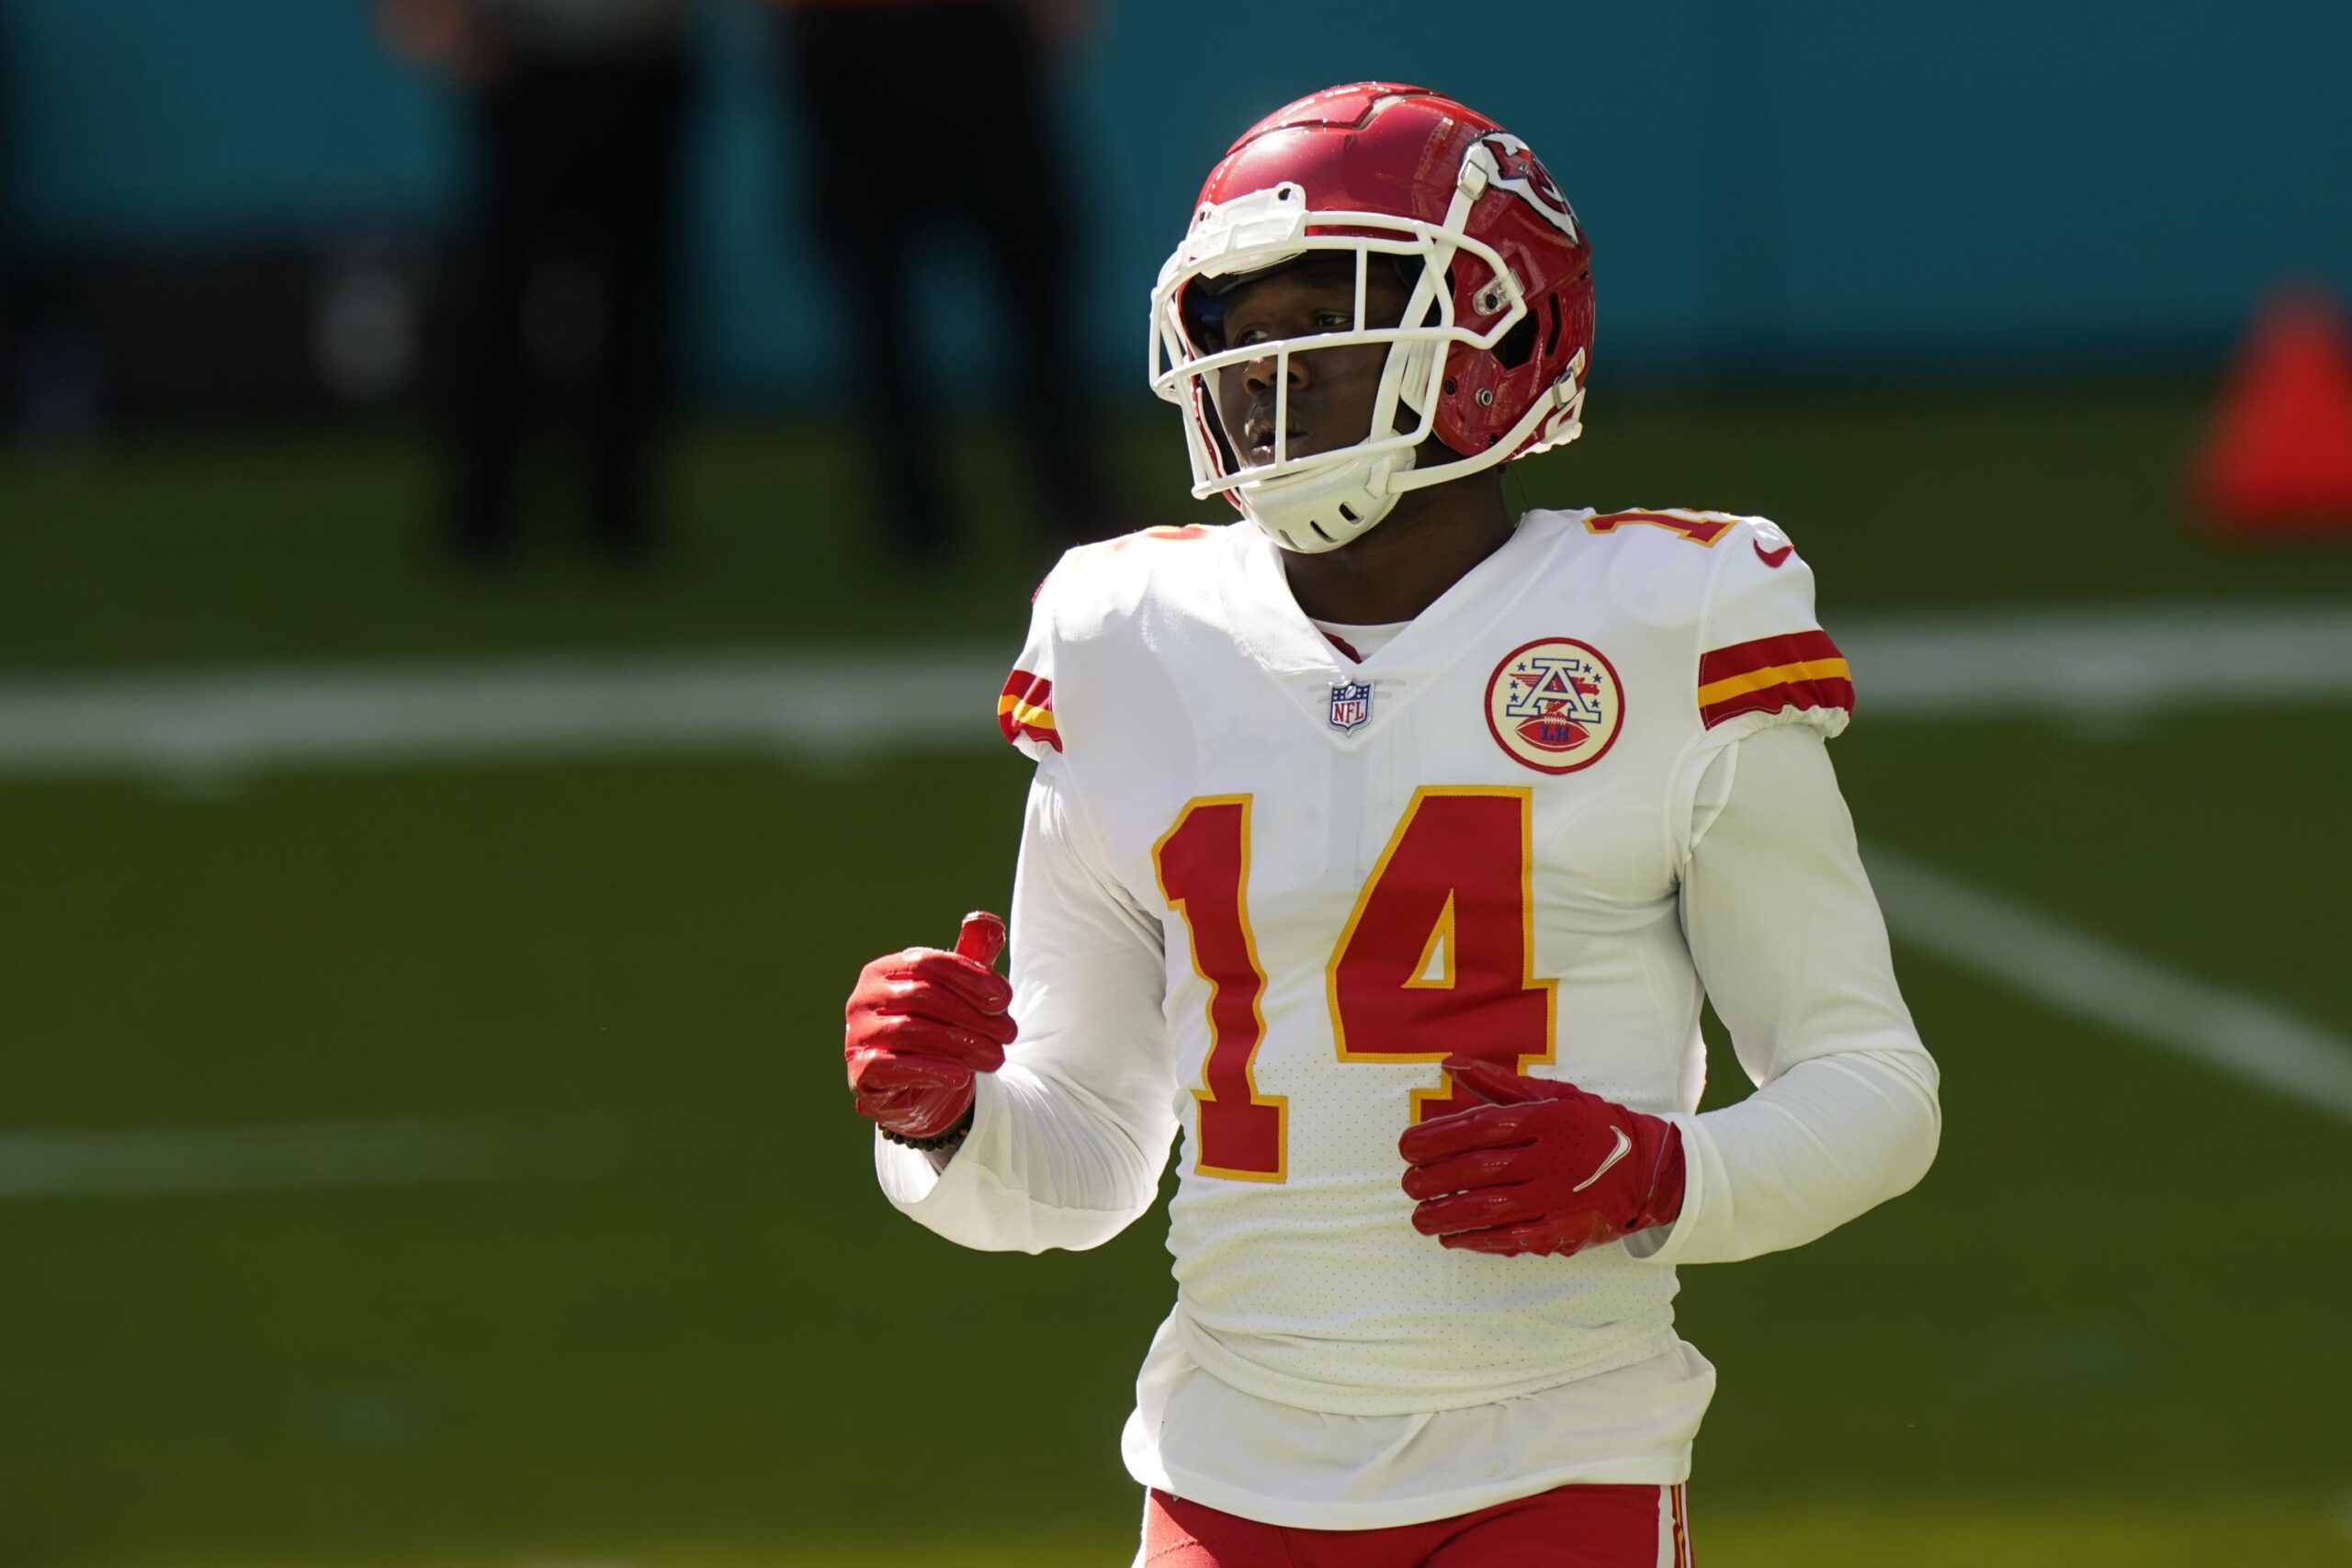 Baltimore Ravens set to sign previous Kansas City Chiefs wide receiver Sammy Watkins to one-year, $6 million deal, per report